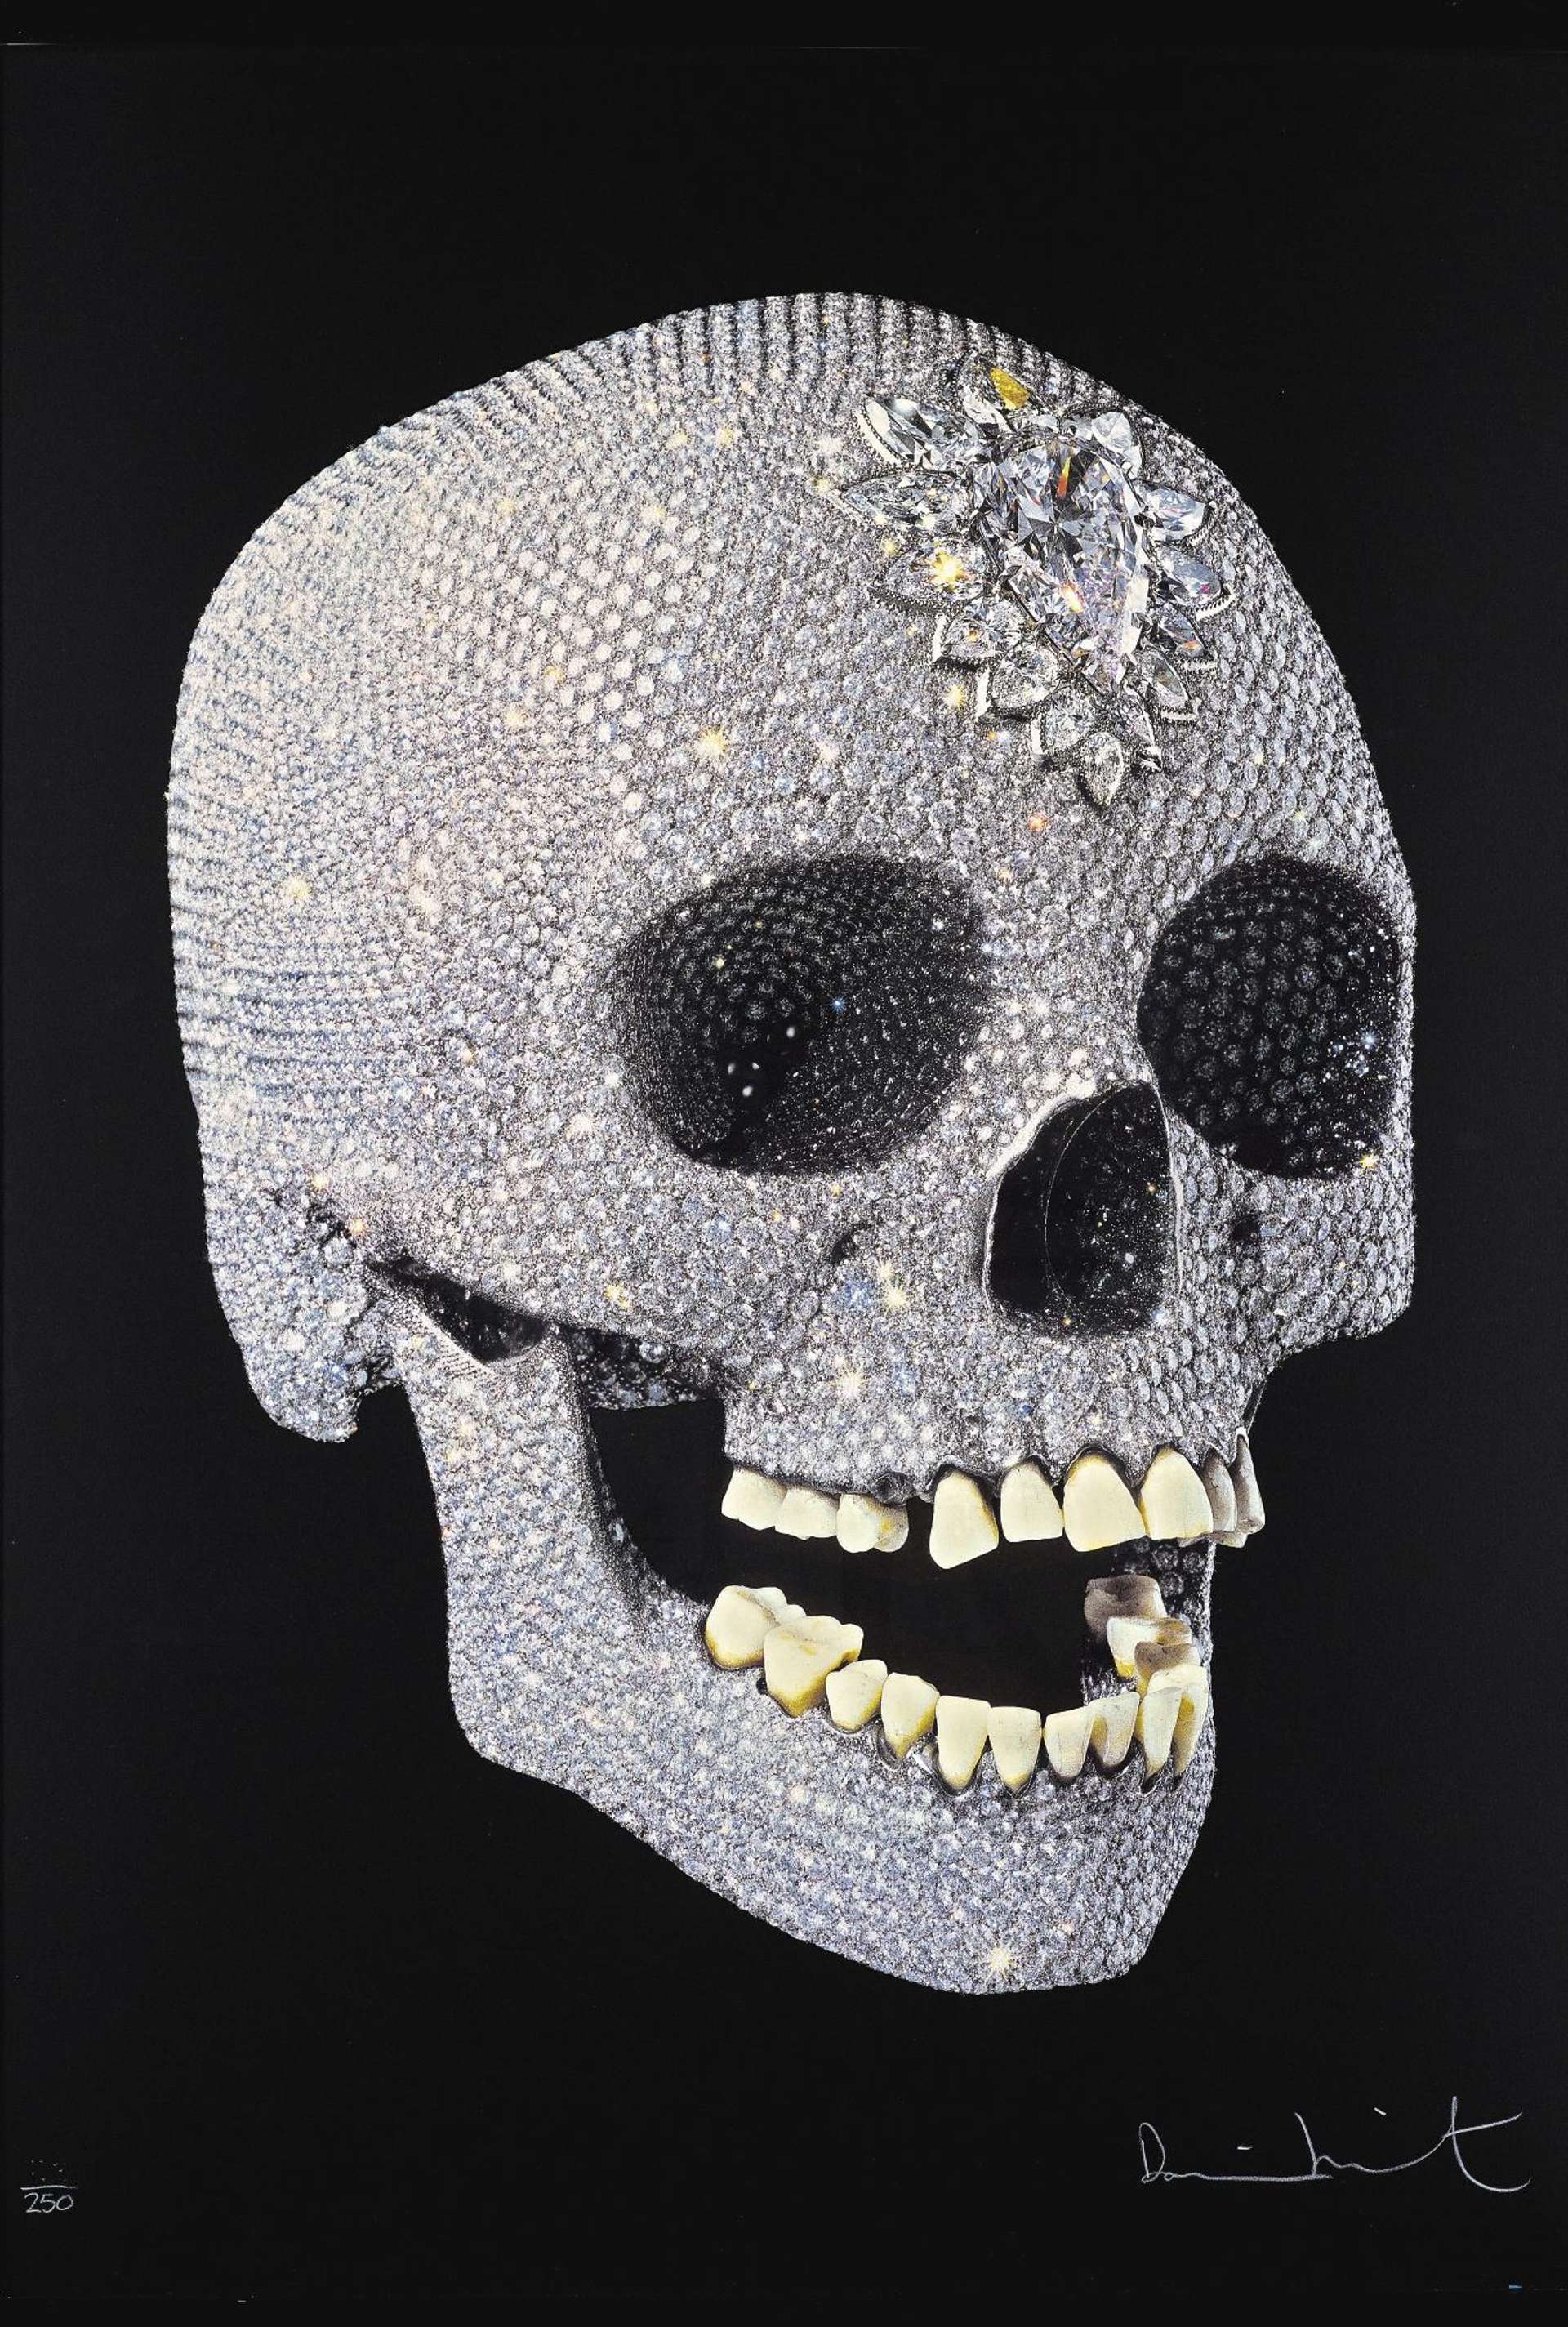 For The Love Of God, The Diamond Skull by Damien Hirst